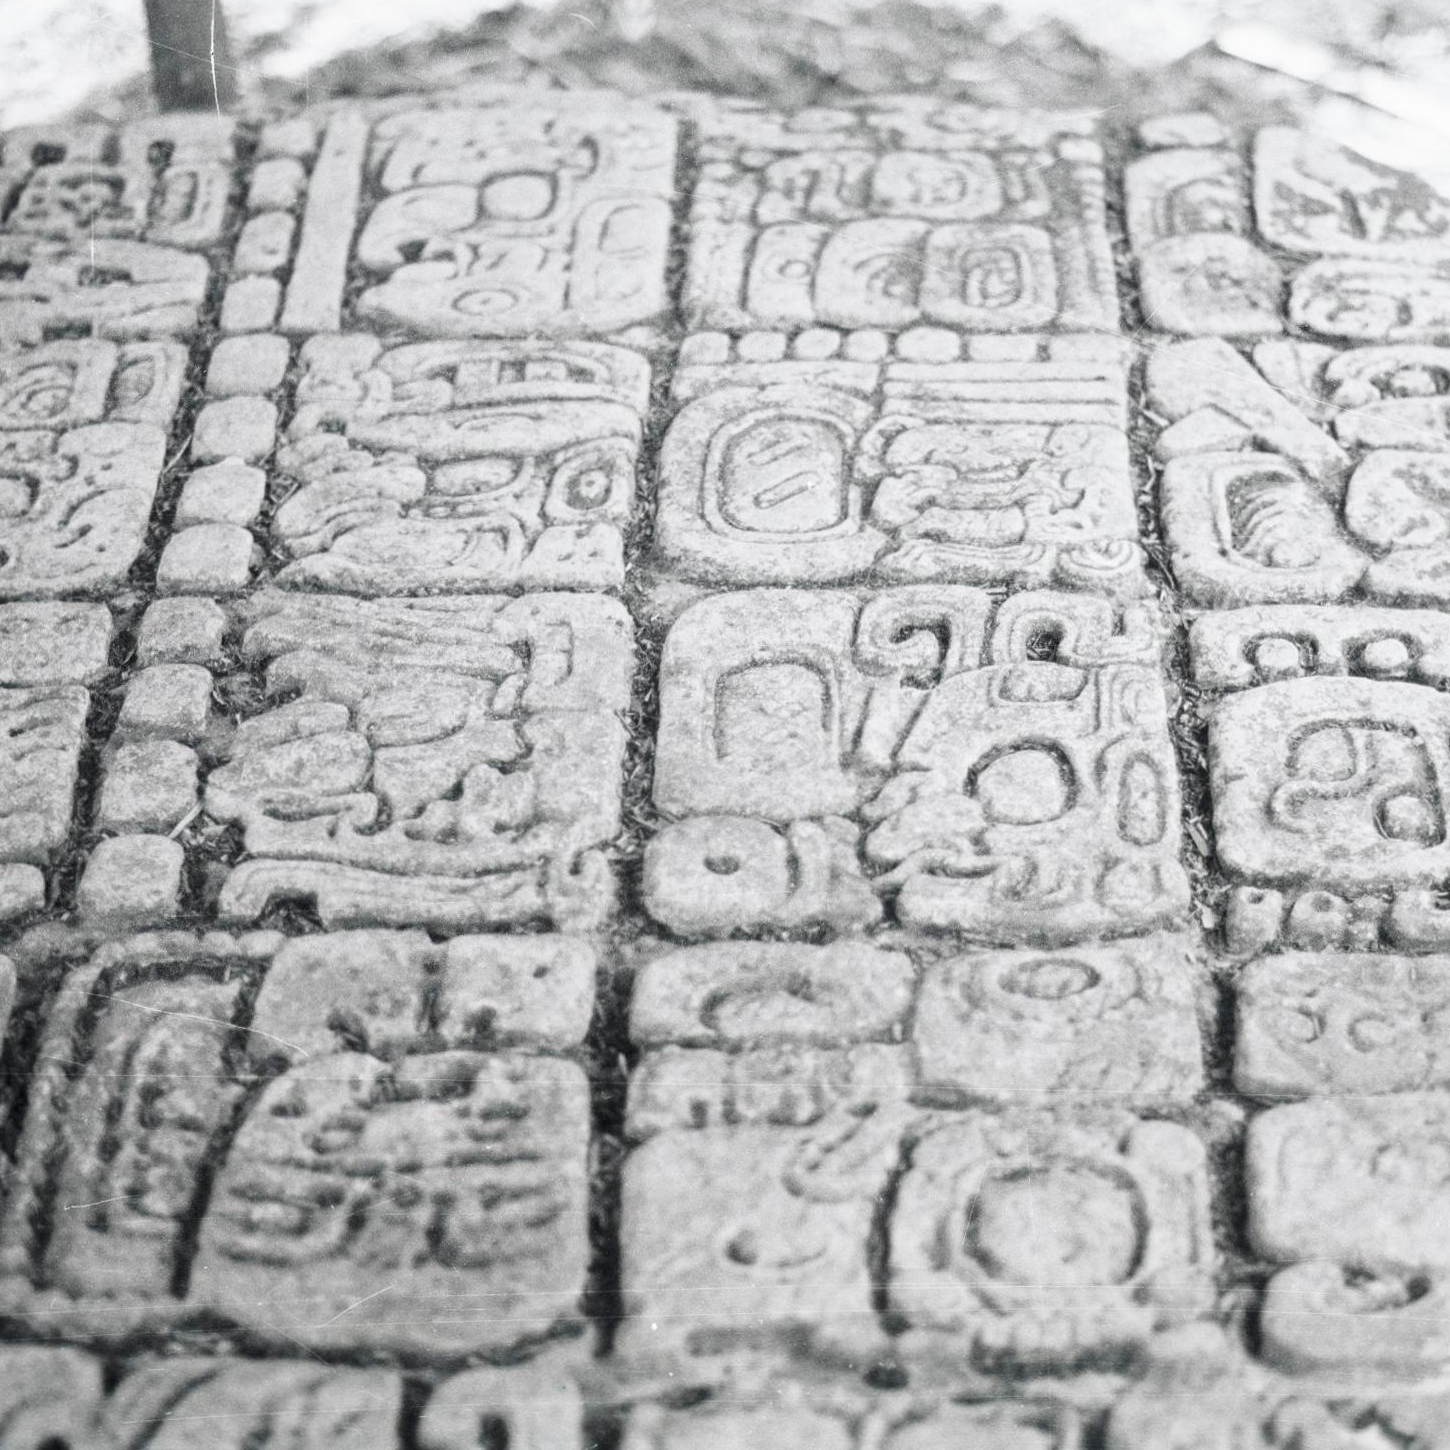 black-and-white picture of a Mayan stone stela, photographed by Karl Herbert Mayer in 1978